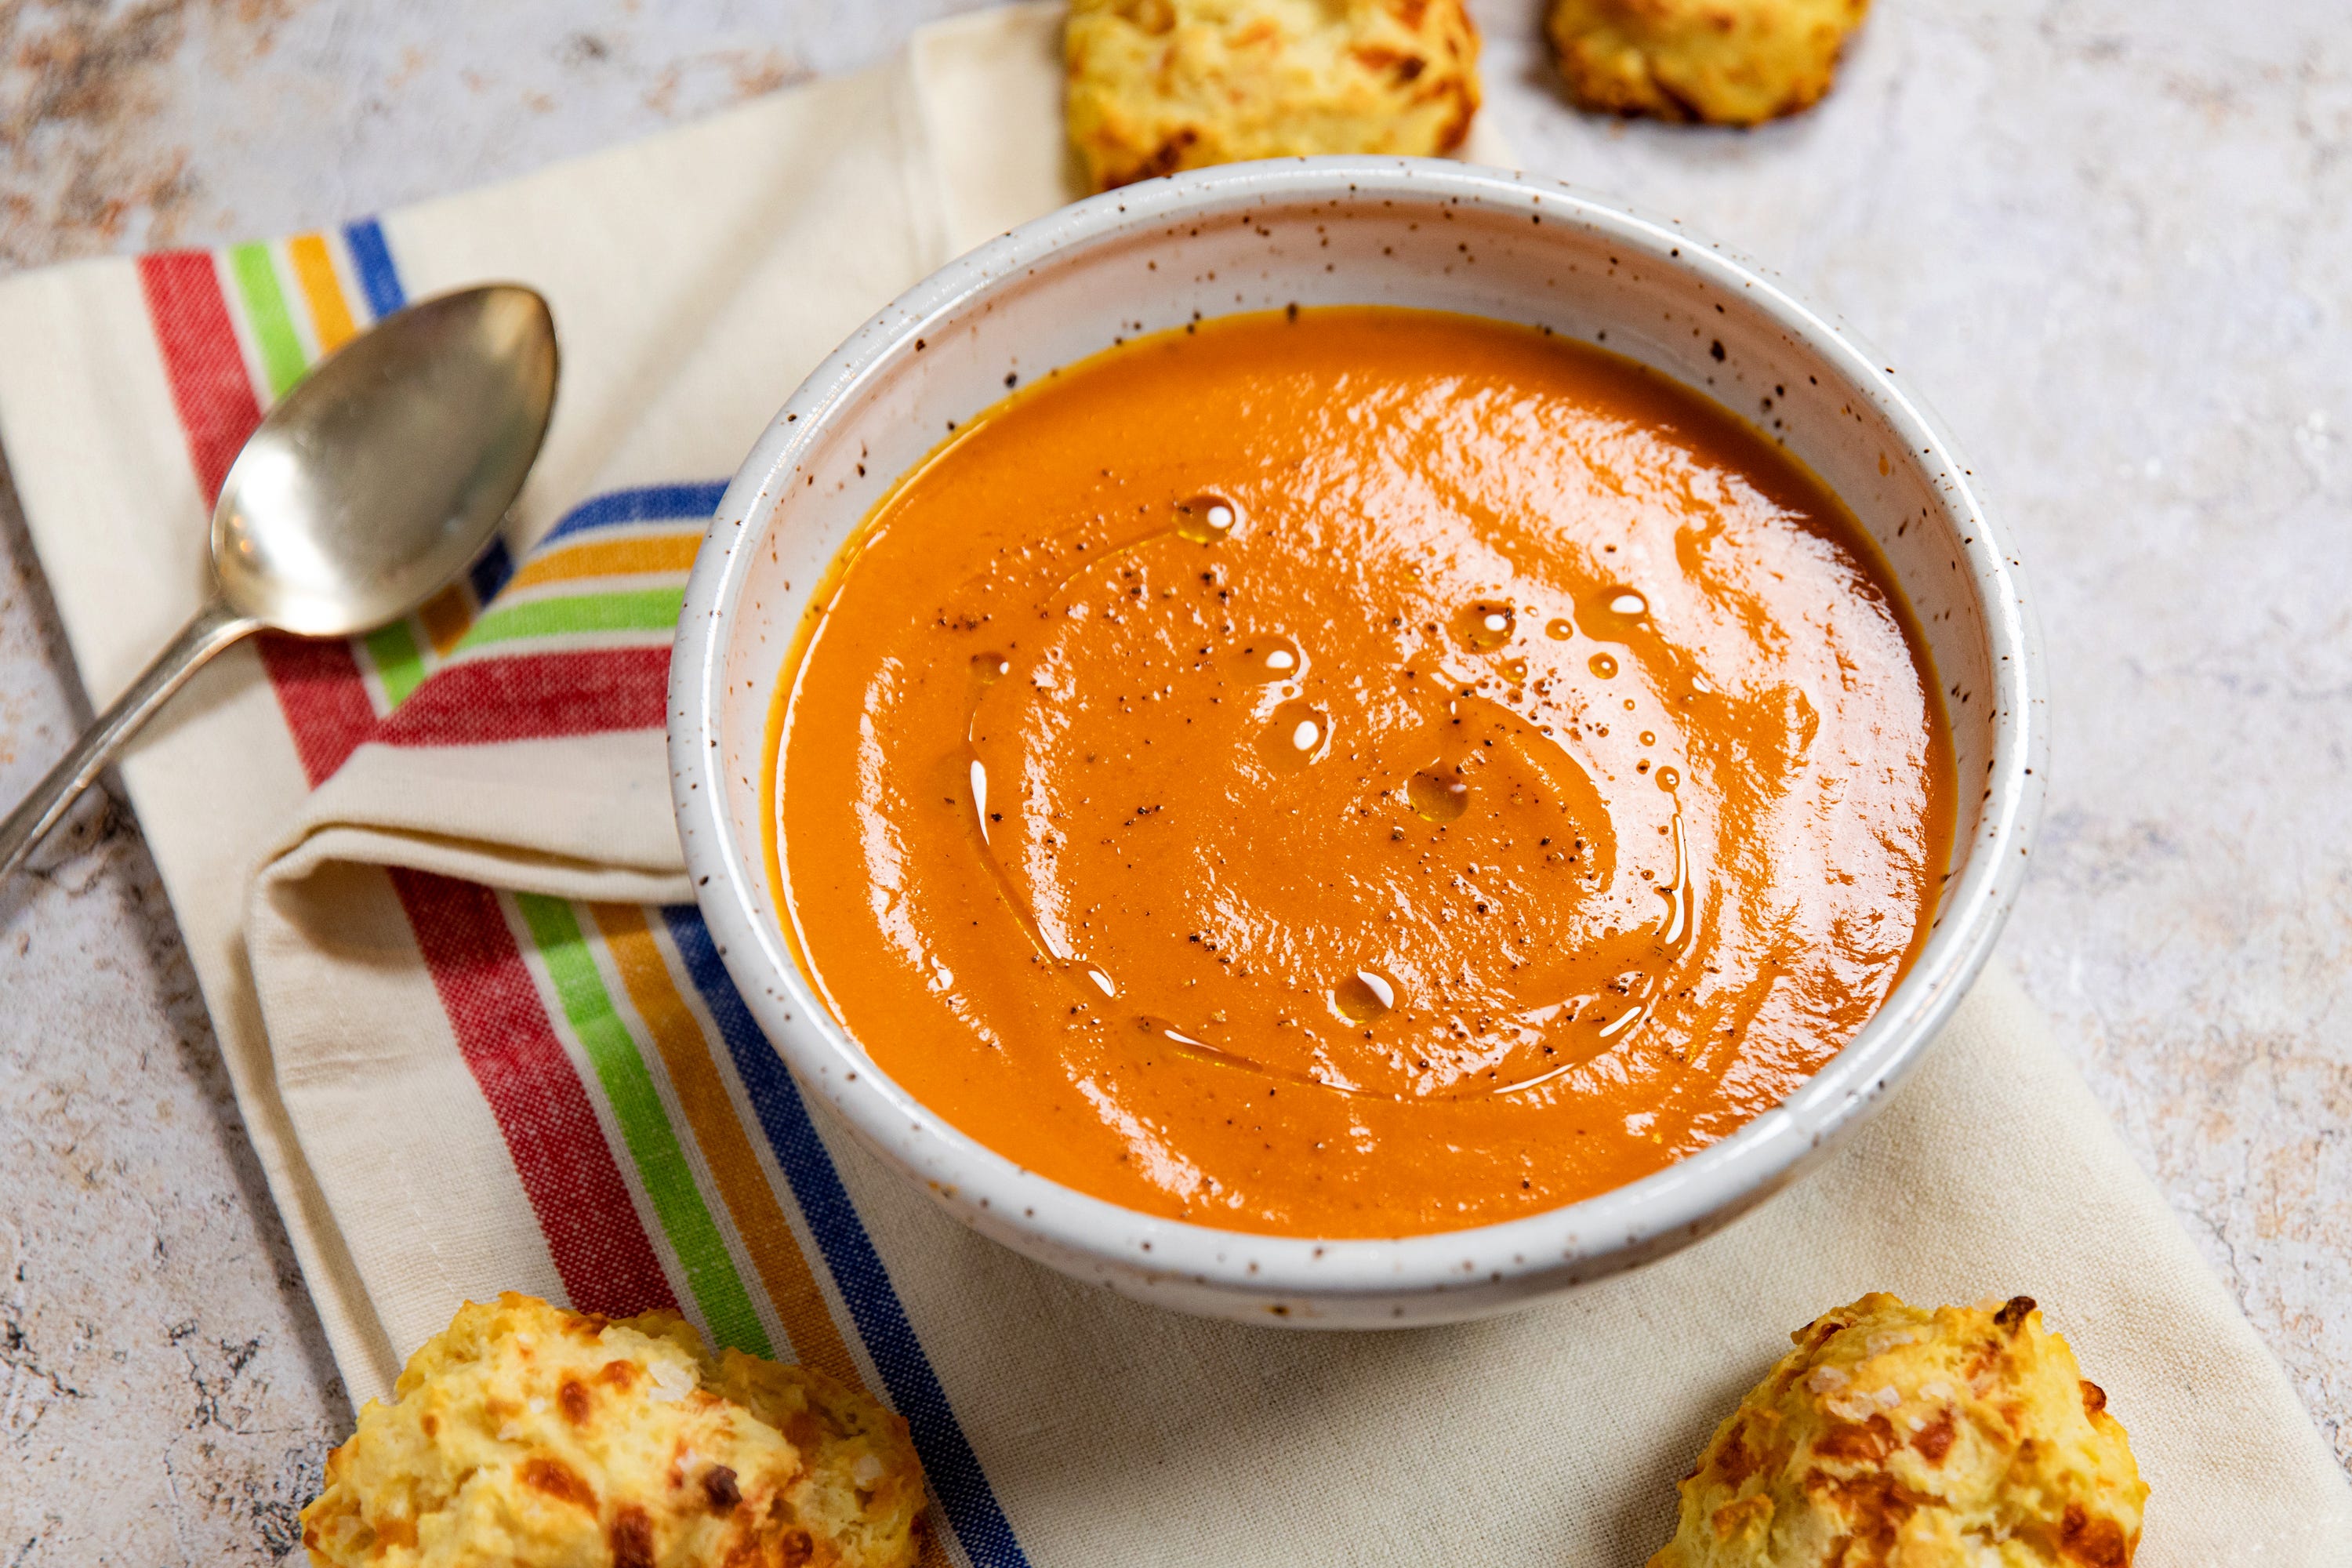 creamy but cream-less tomato soup + cheddar biscuits